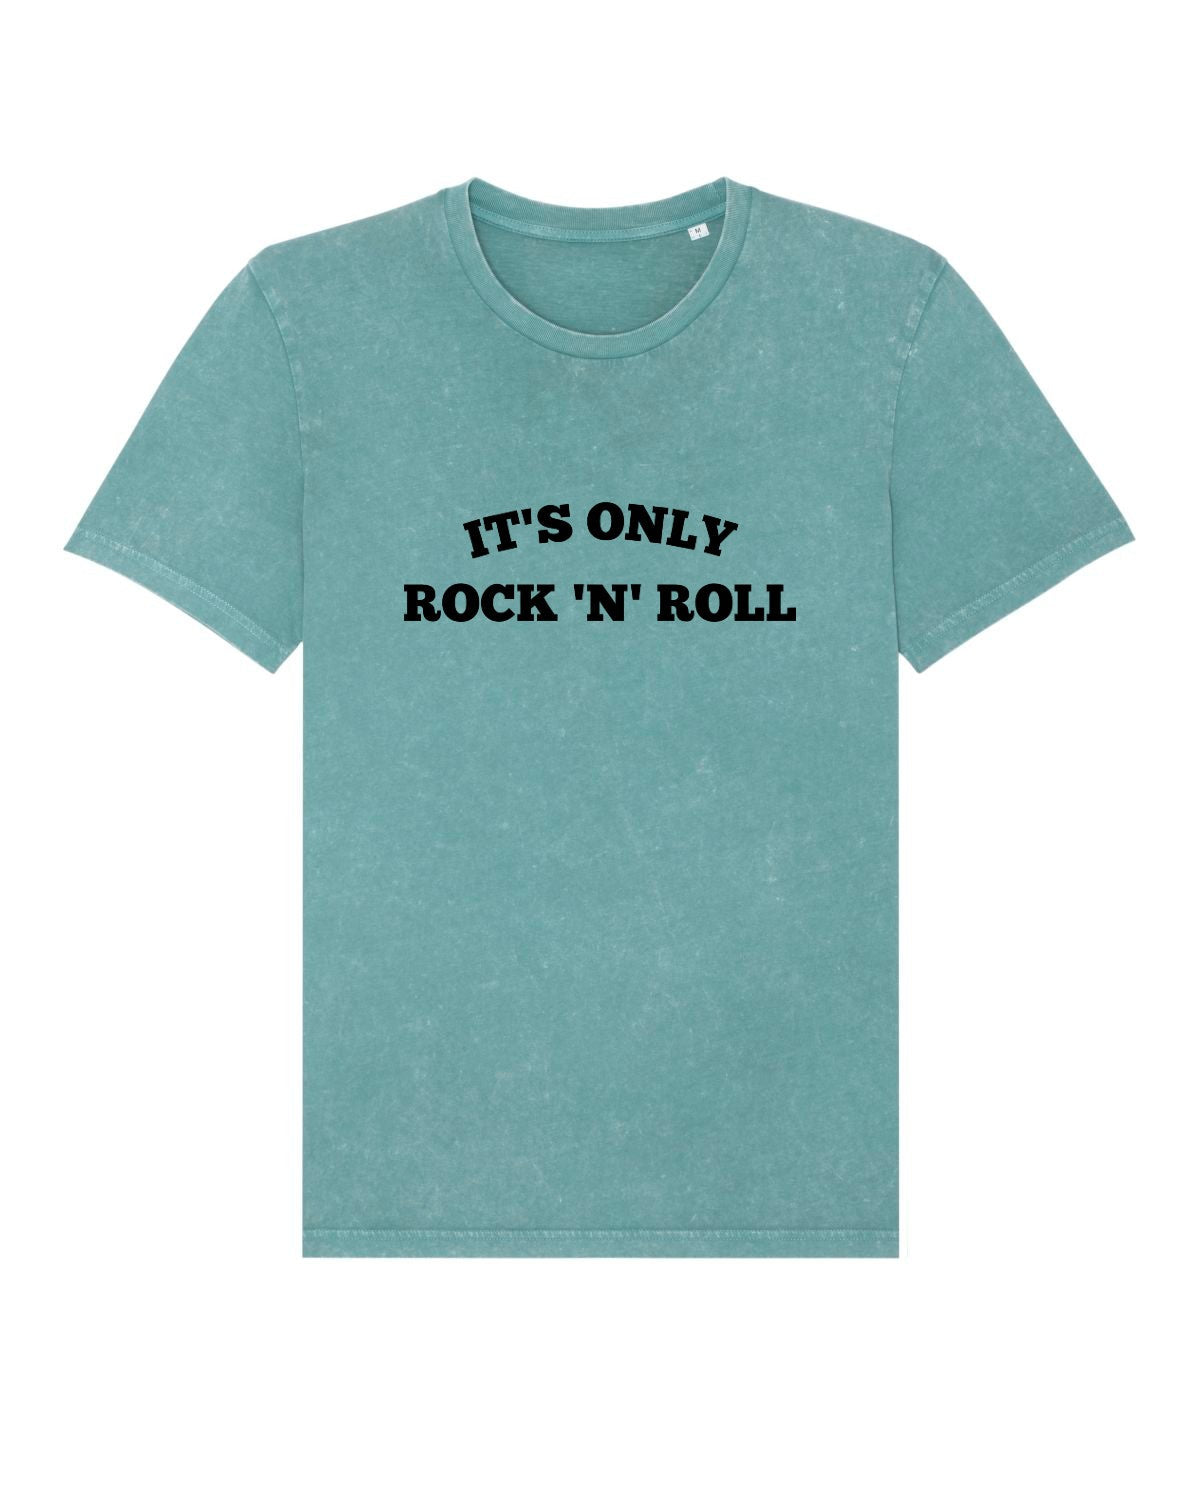 SAMPLE SALE 'IT'S ONLY ROCK 'N' ROLL' EMBROIDERED UNISEX GARMENT DYED ORGANIC COTTON 'CREATOR VINTAGE' T-SHIRT (SIZE SMALL)